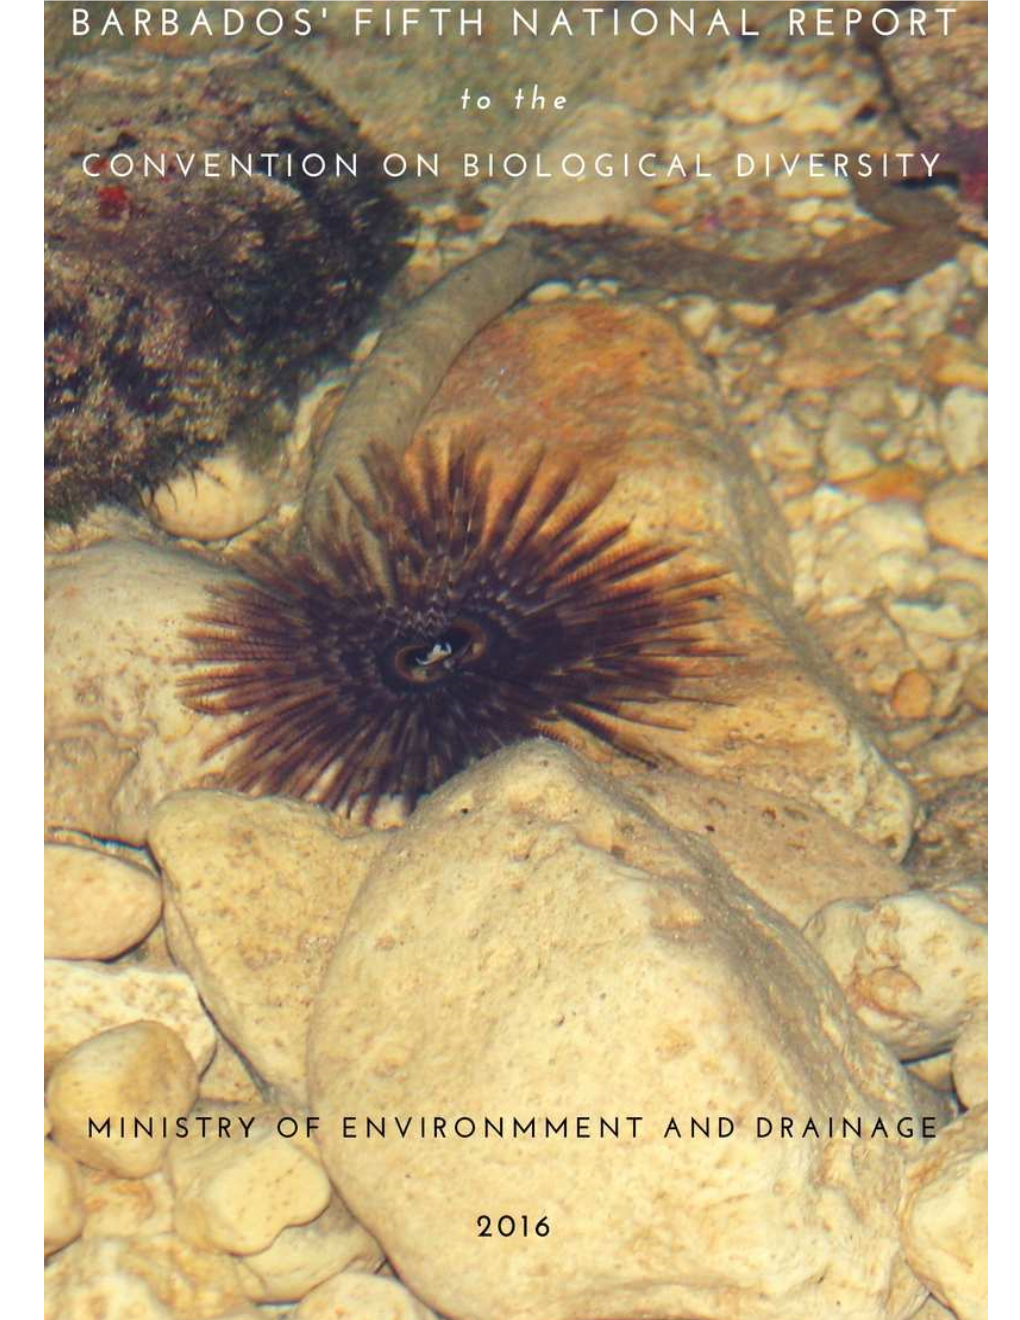 Barbados Has Submitted Four National Reports to the Convention on Biological Diversity; the Fourth National Report Being Submitted in 2011